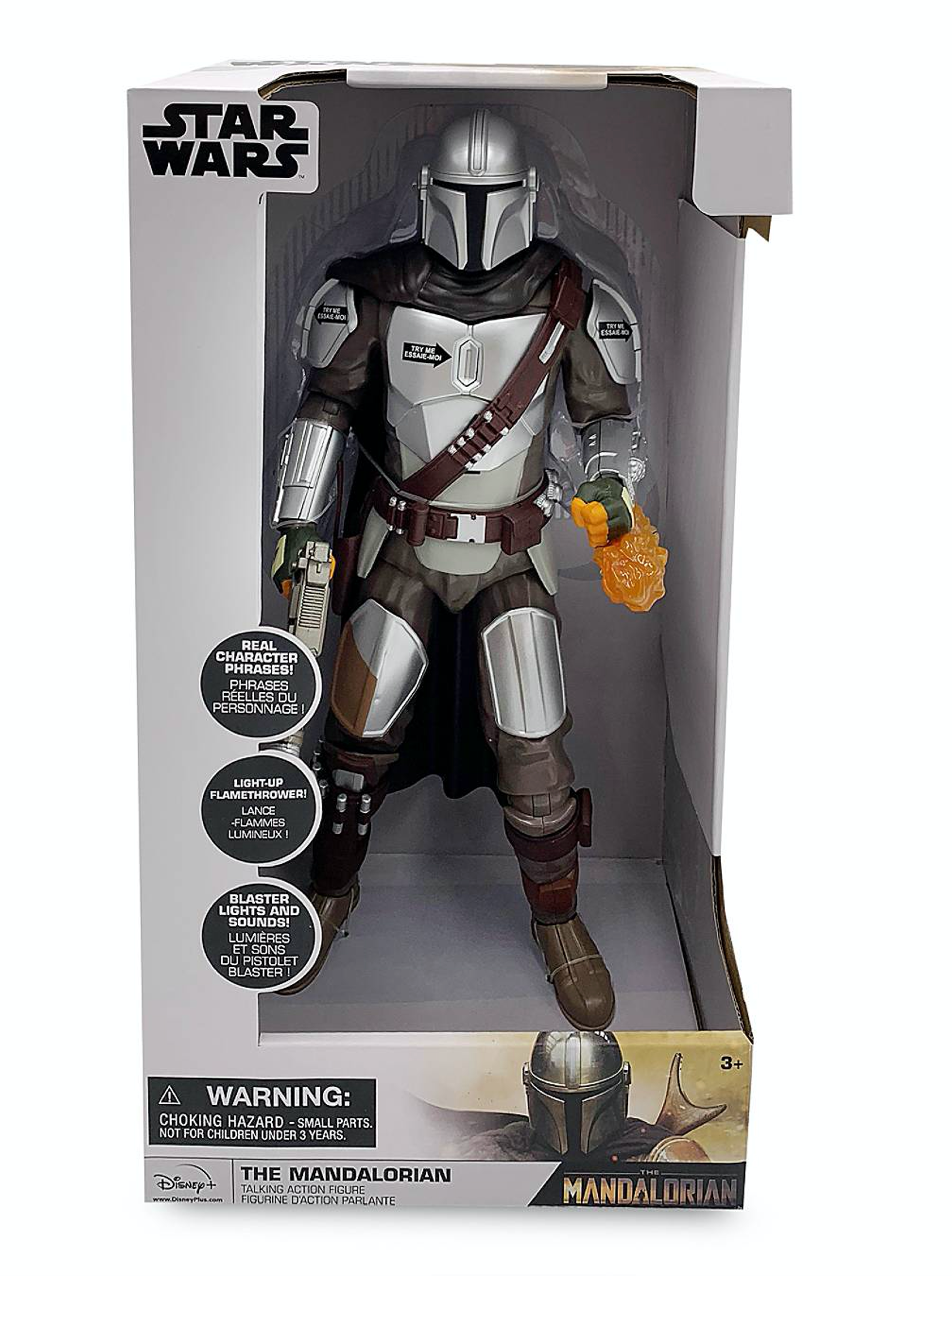 Disney Star Wars The Mandalorian Talking Action Figure New with Box